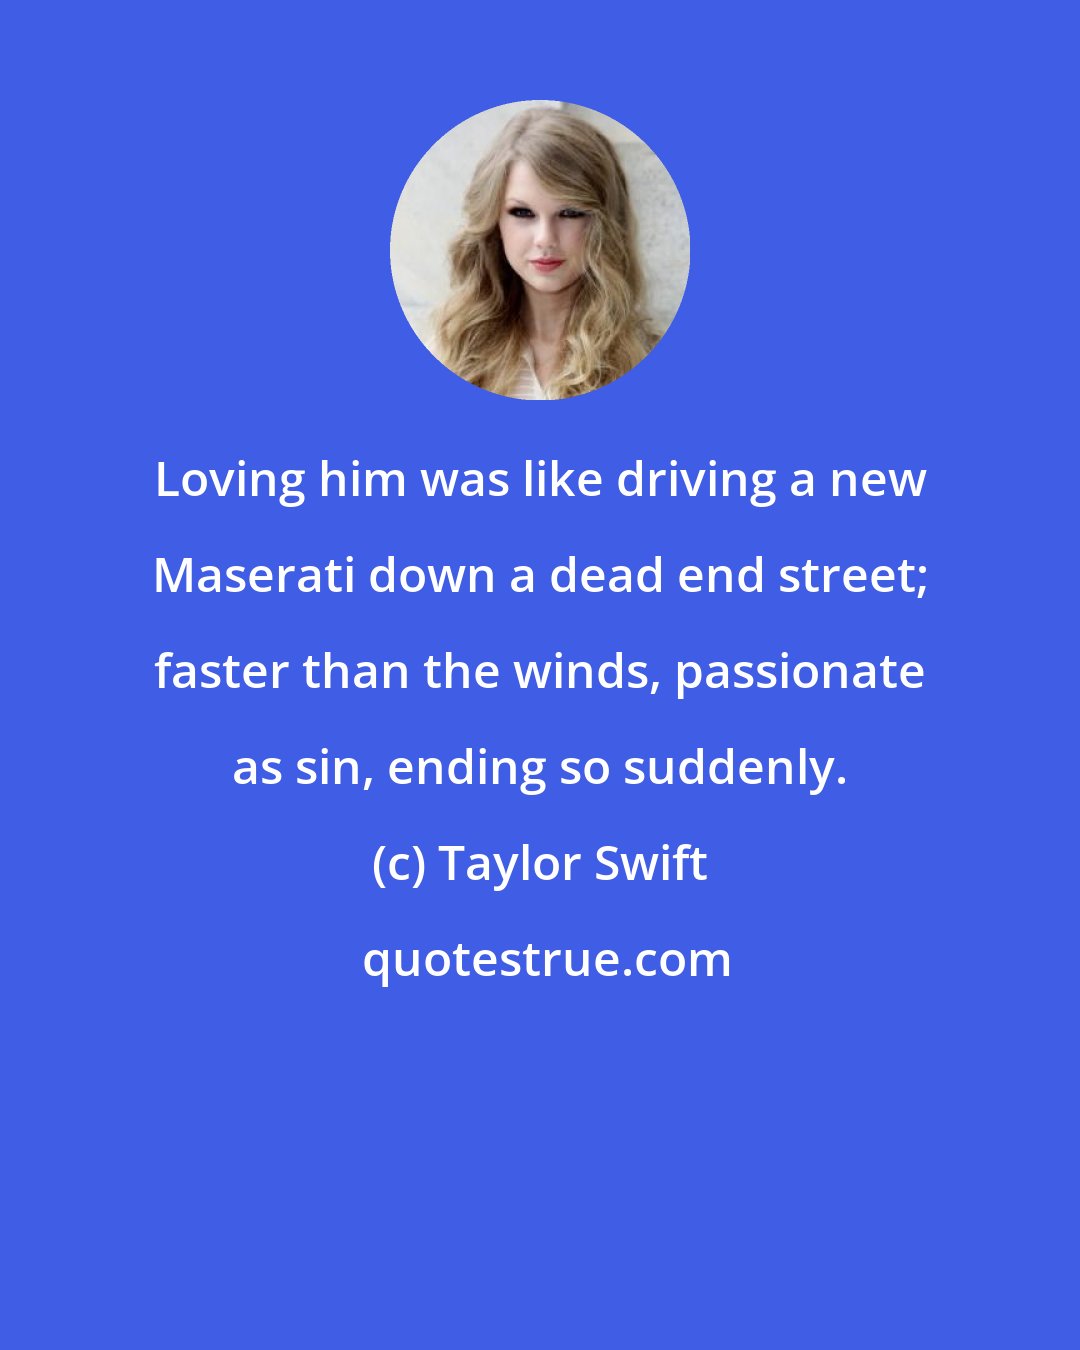 Taylor Swift: Loving him was like driving a new Maserati down a dead end street; faster than the winds, passionate as sin, ending so suddenly.